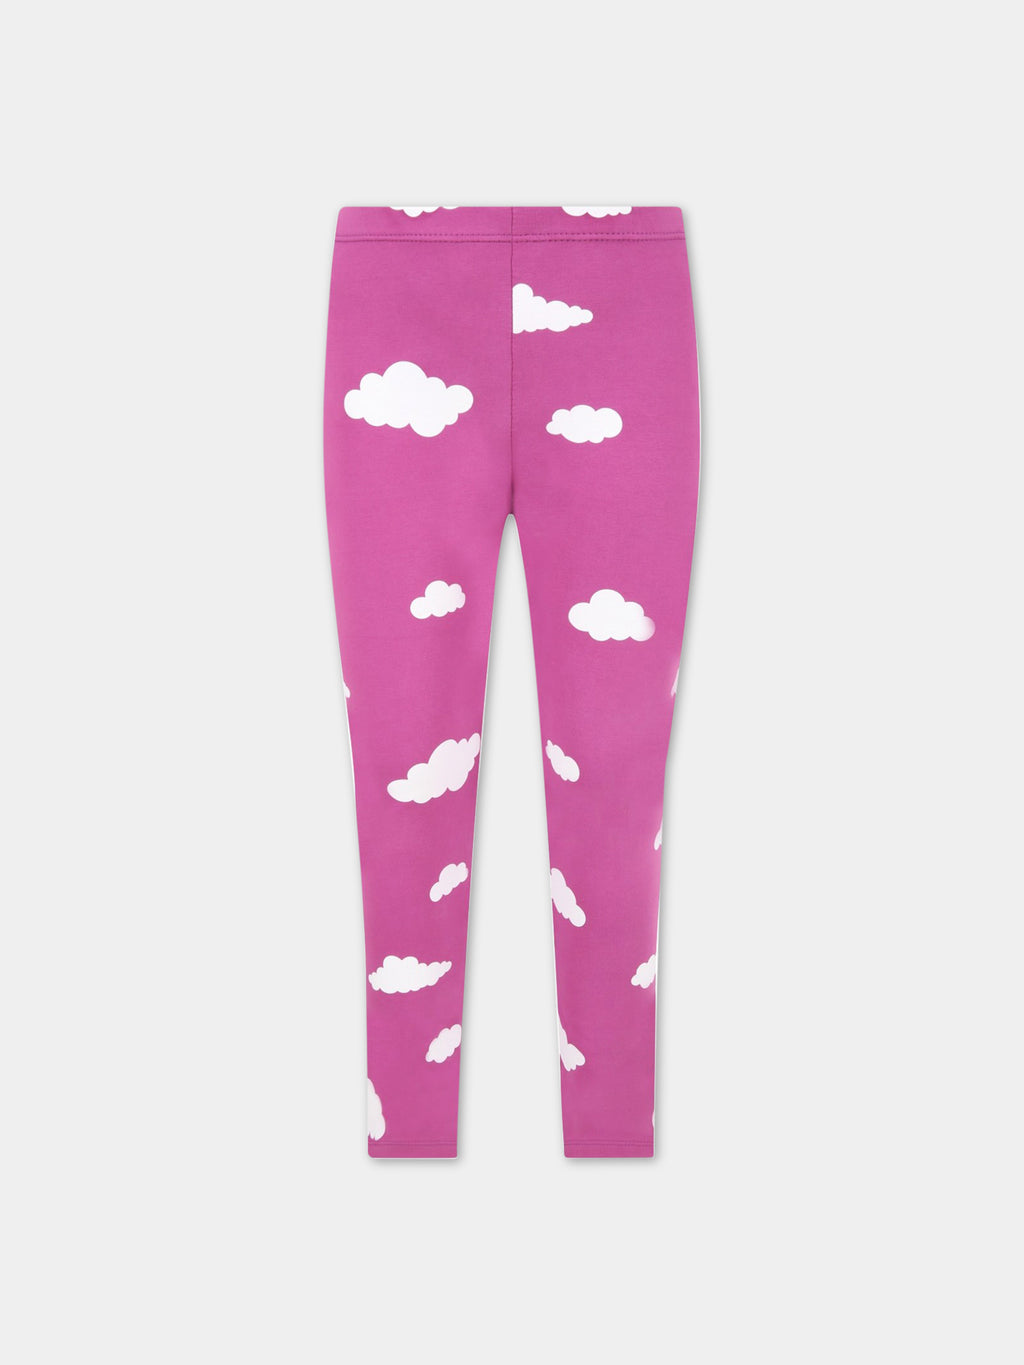 Purple leggings for kids with clouds